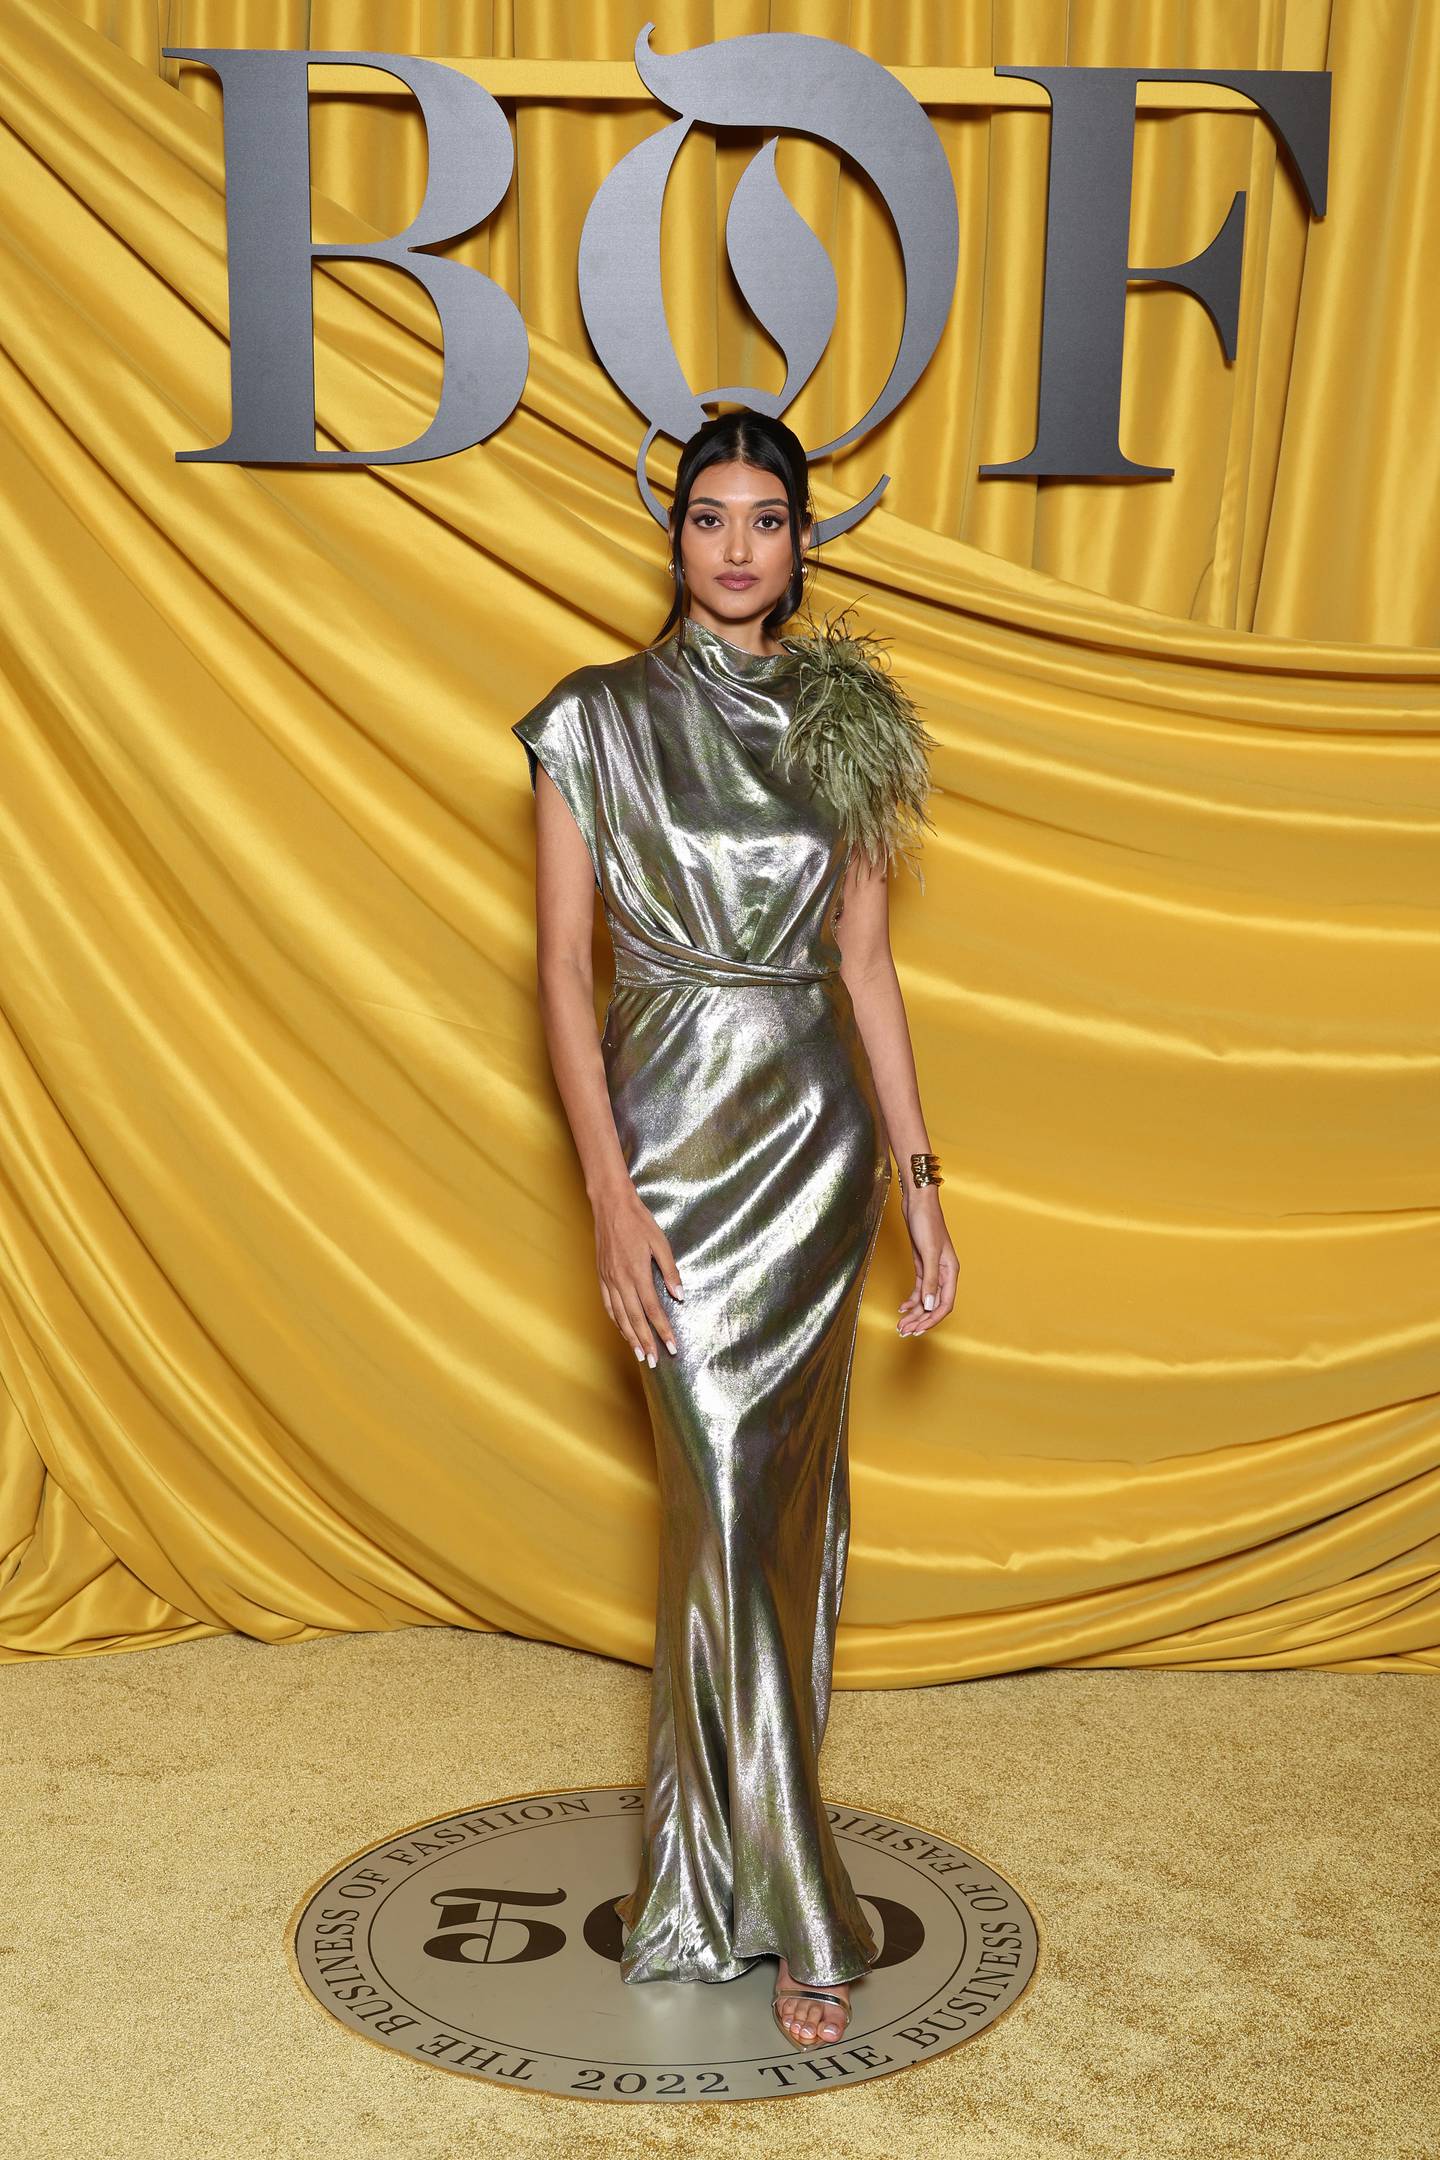 Neelam Gill, model, from United Kingdom, attends the #BoF500 gala during Paris Fashion Week.